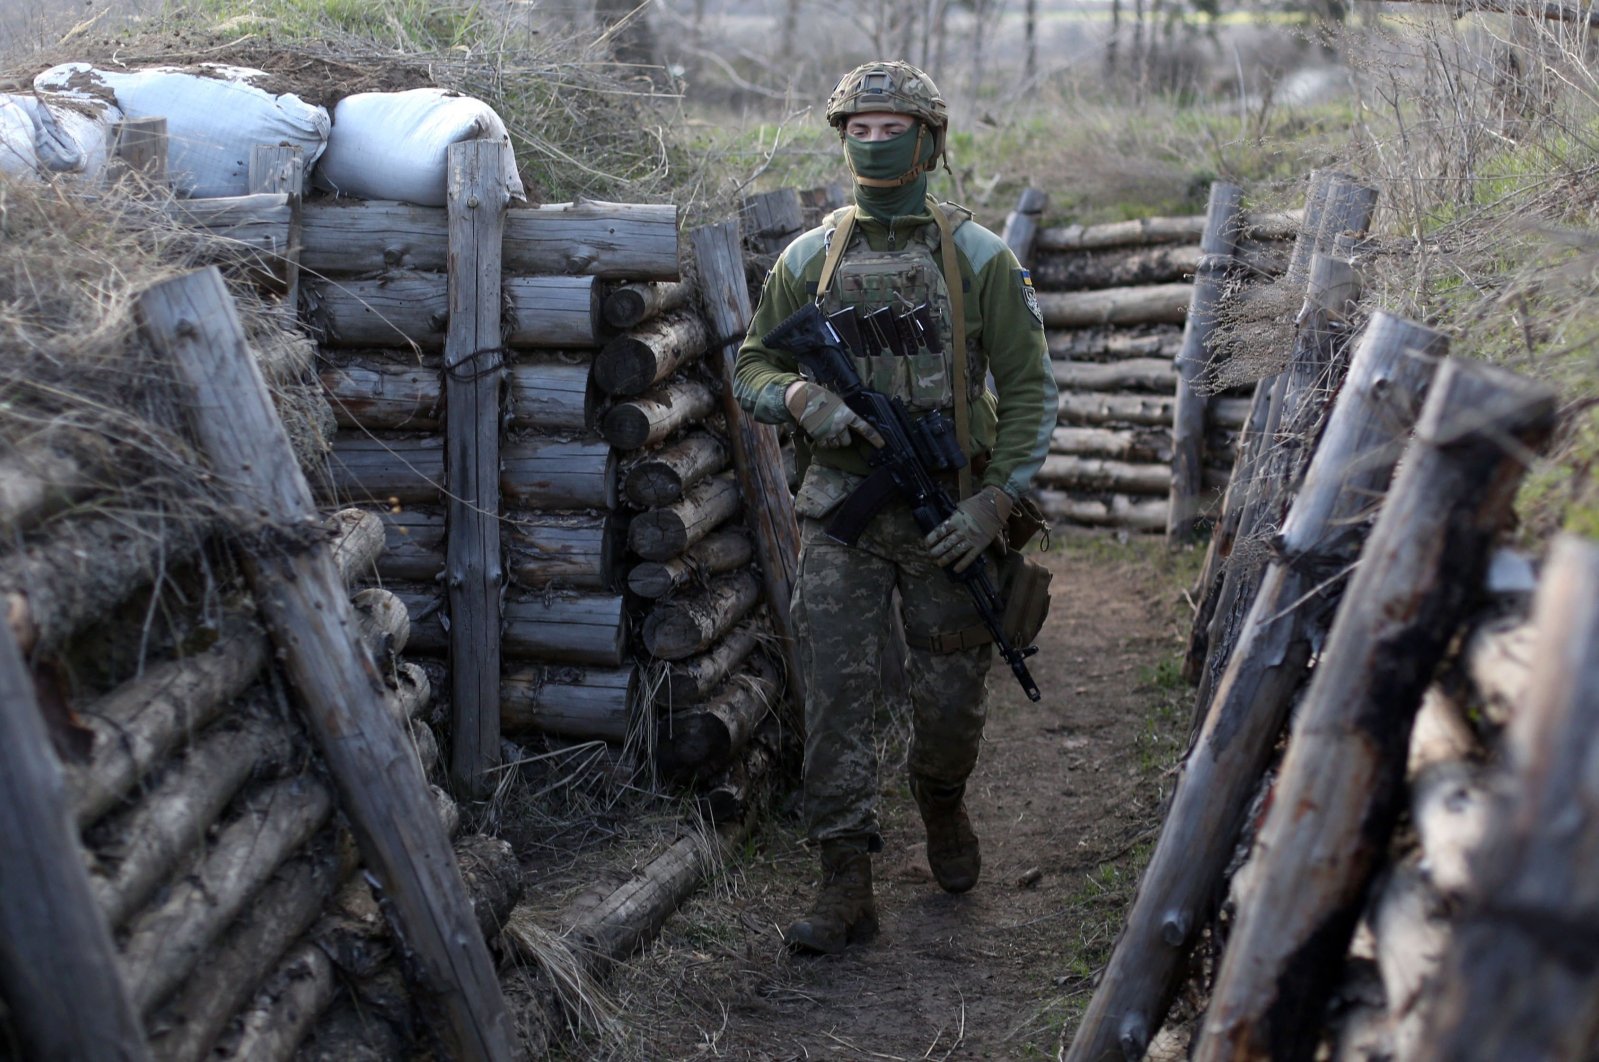 A Ukrainian soldier patrols along a trench in Schastya, Lugansk region, near the front line with Russia backed separatists, April 16, 2021. (AFP Photo)